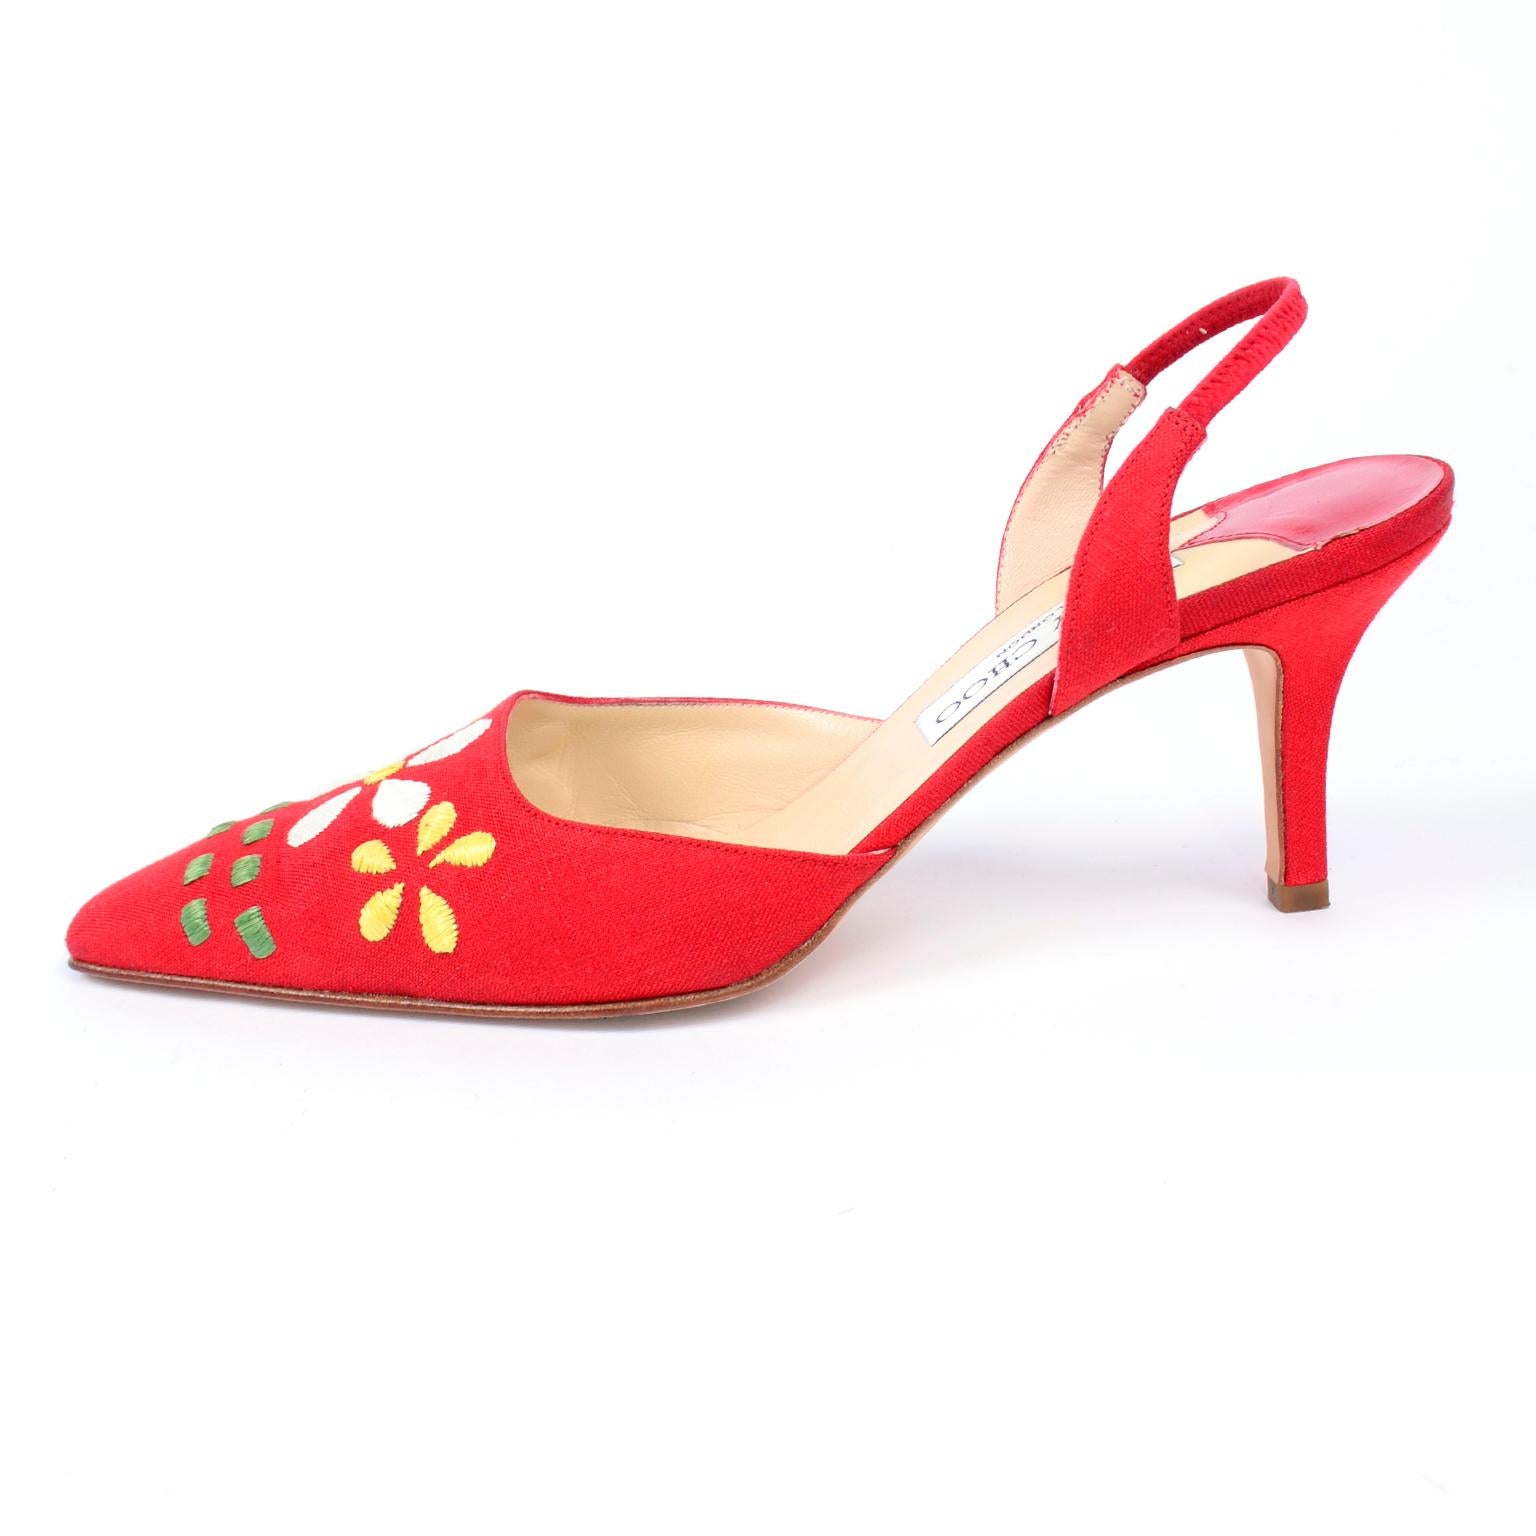 Red Linen Jimmy Choo Slingback Heel Shoes With Daisy Flowers 4